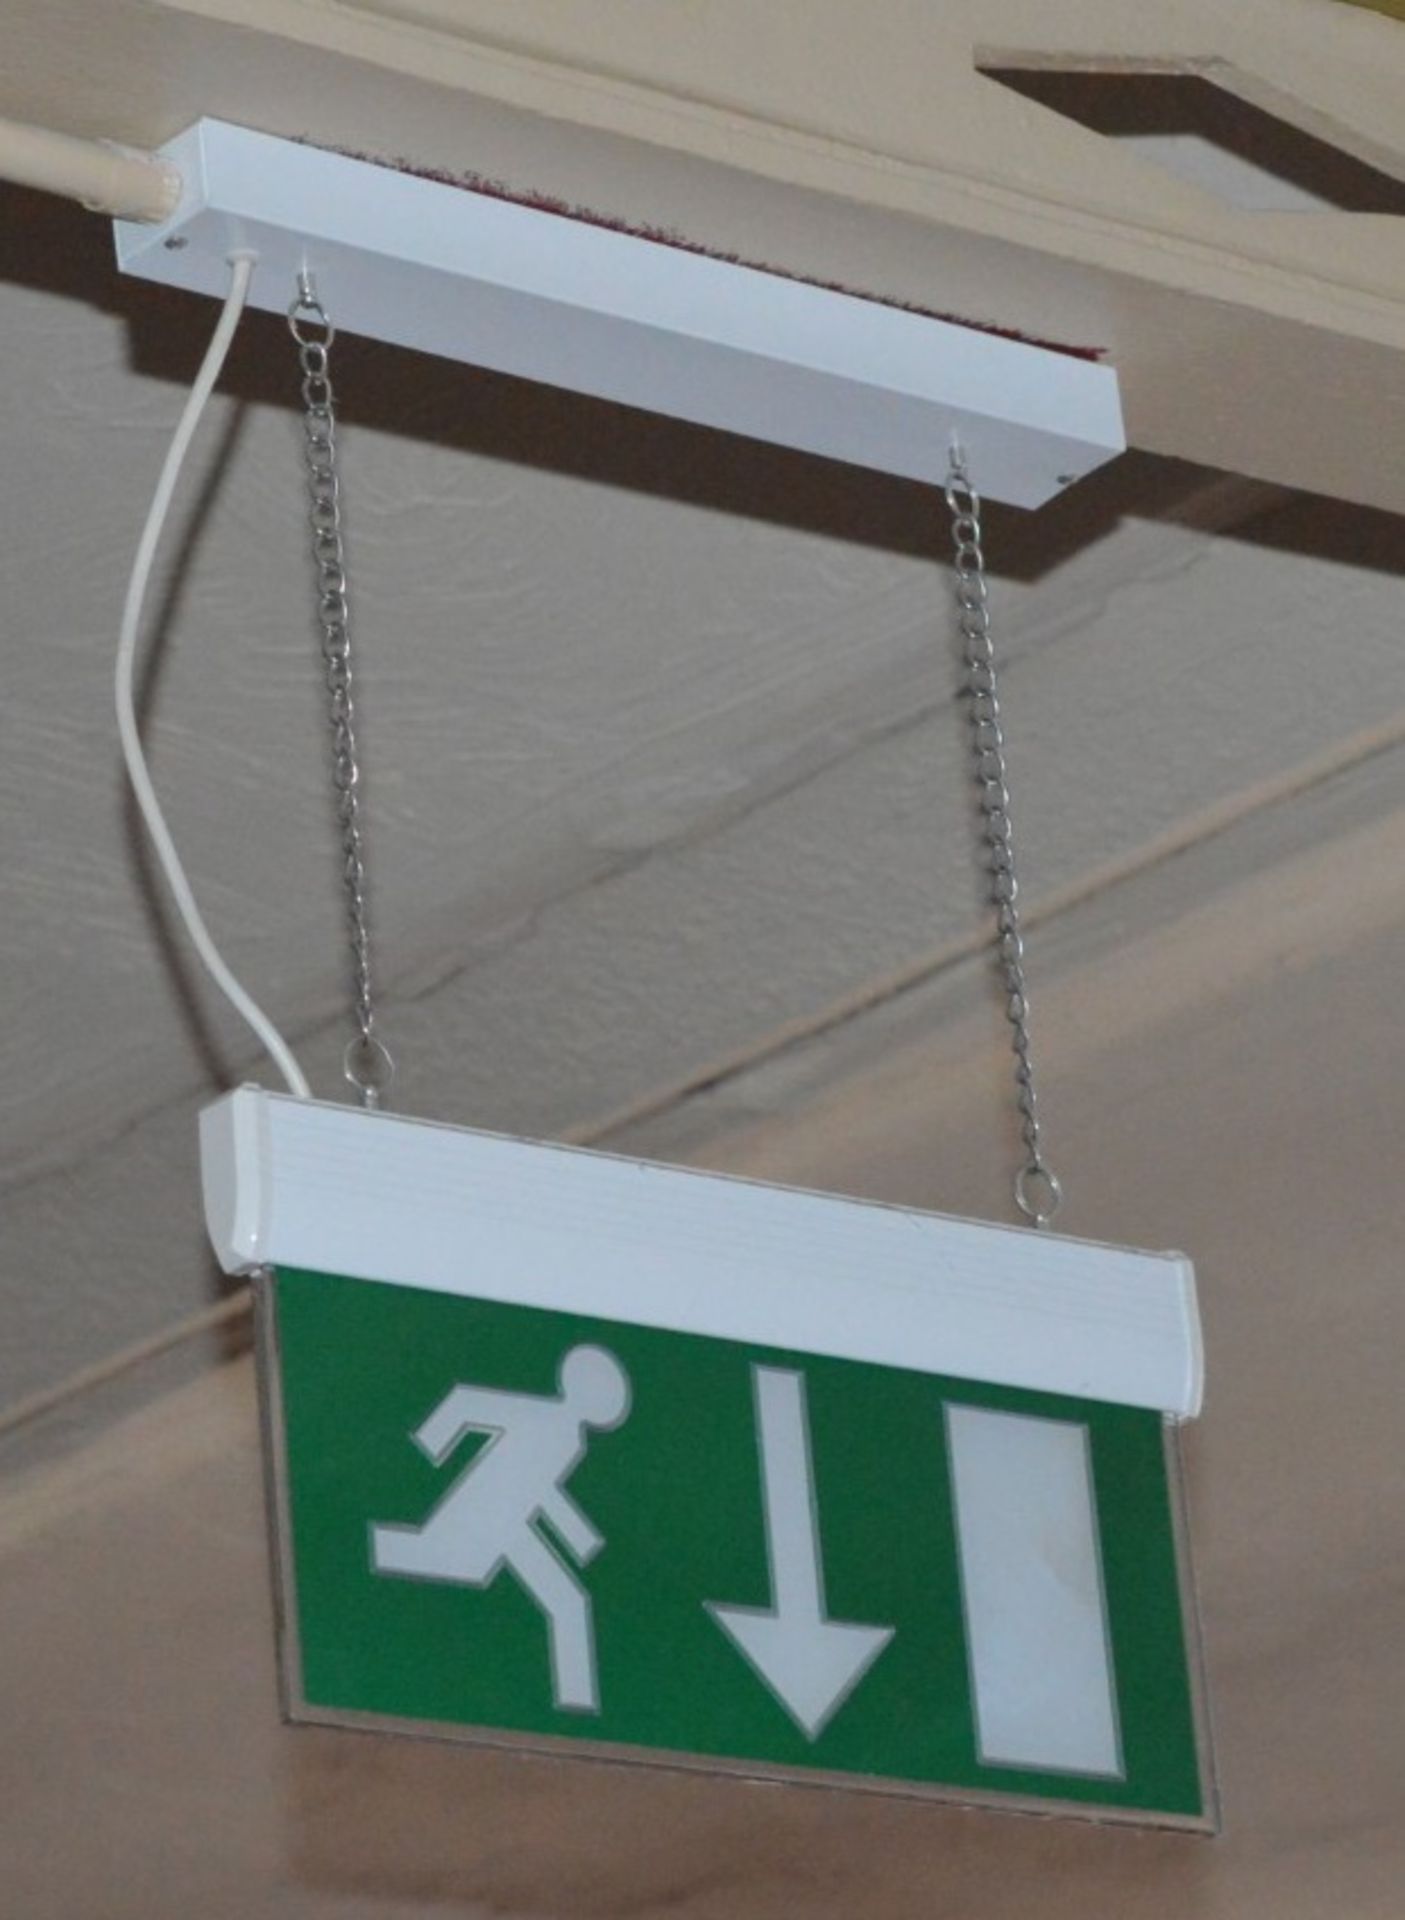 1 x Eterna Maintained Emergency Exit Sign - Ref BB1118  - CL351 - Location: Chorley PR6